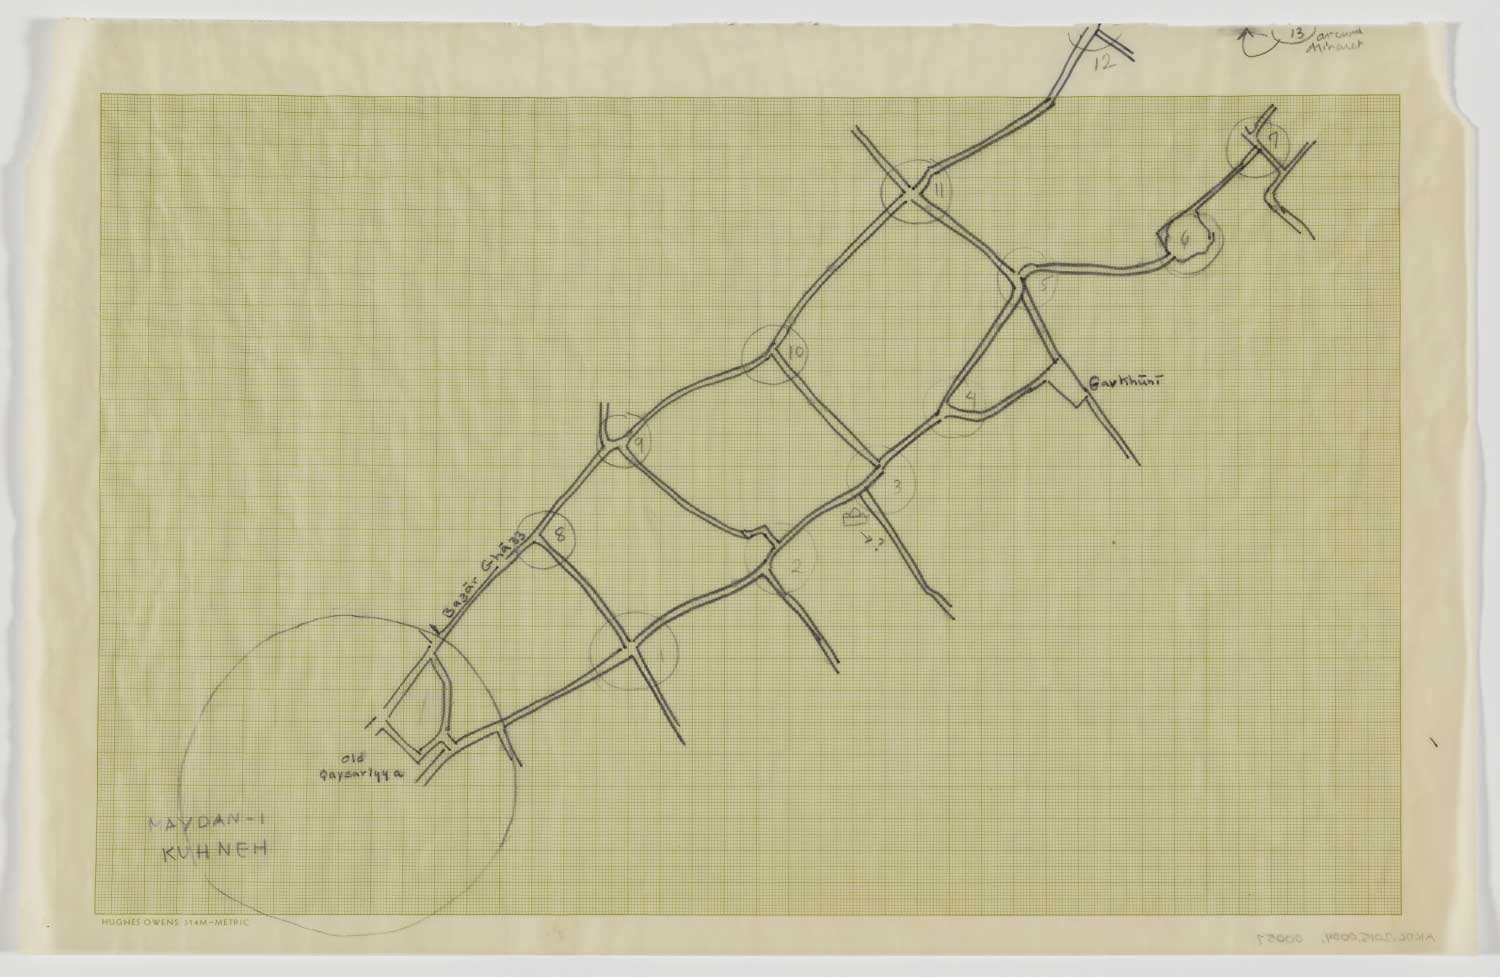 Pencil sketch of nodes in Jubara Quarter of Isfahan, showing node numbers and locations, and main streets.